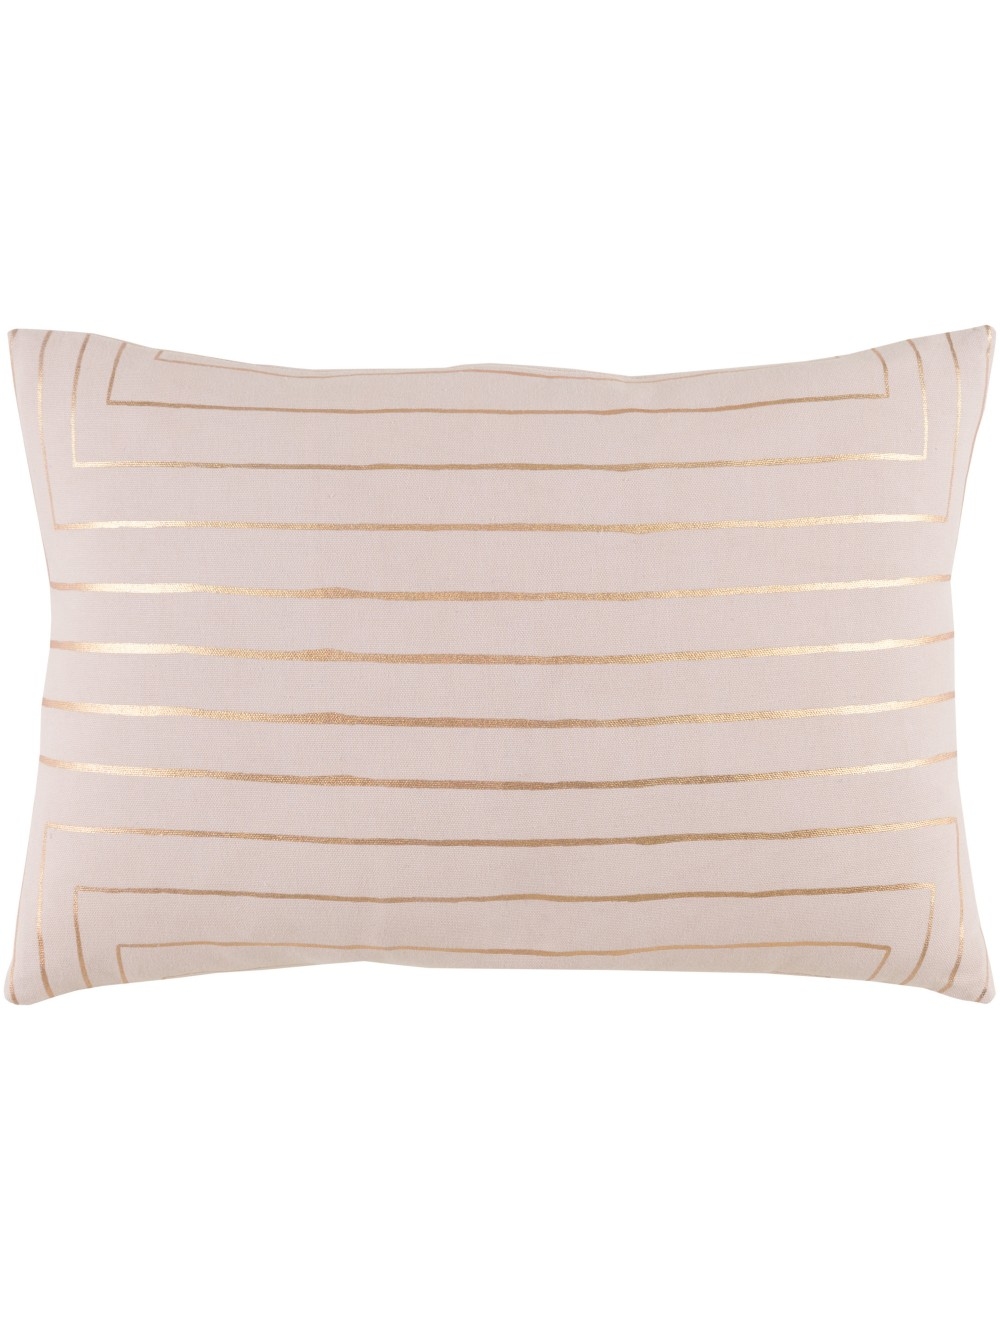 Parallels Pillow - Blush - 13'' x 19''- Down Filled - Image 0